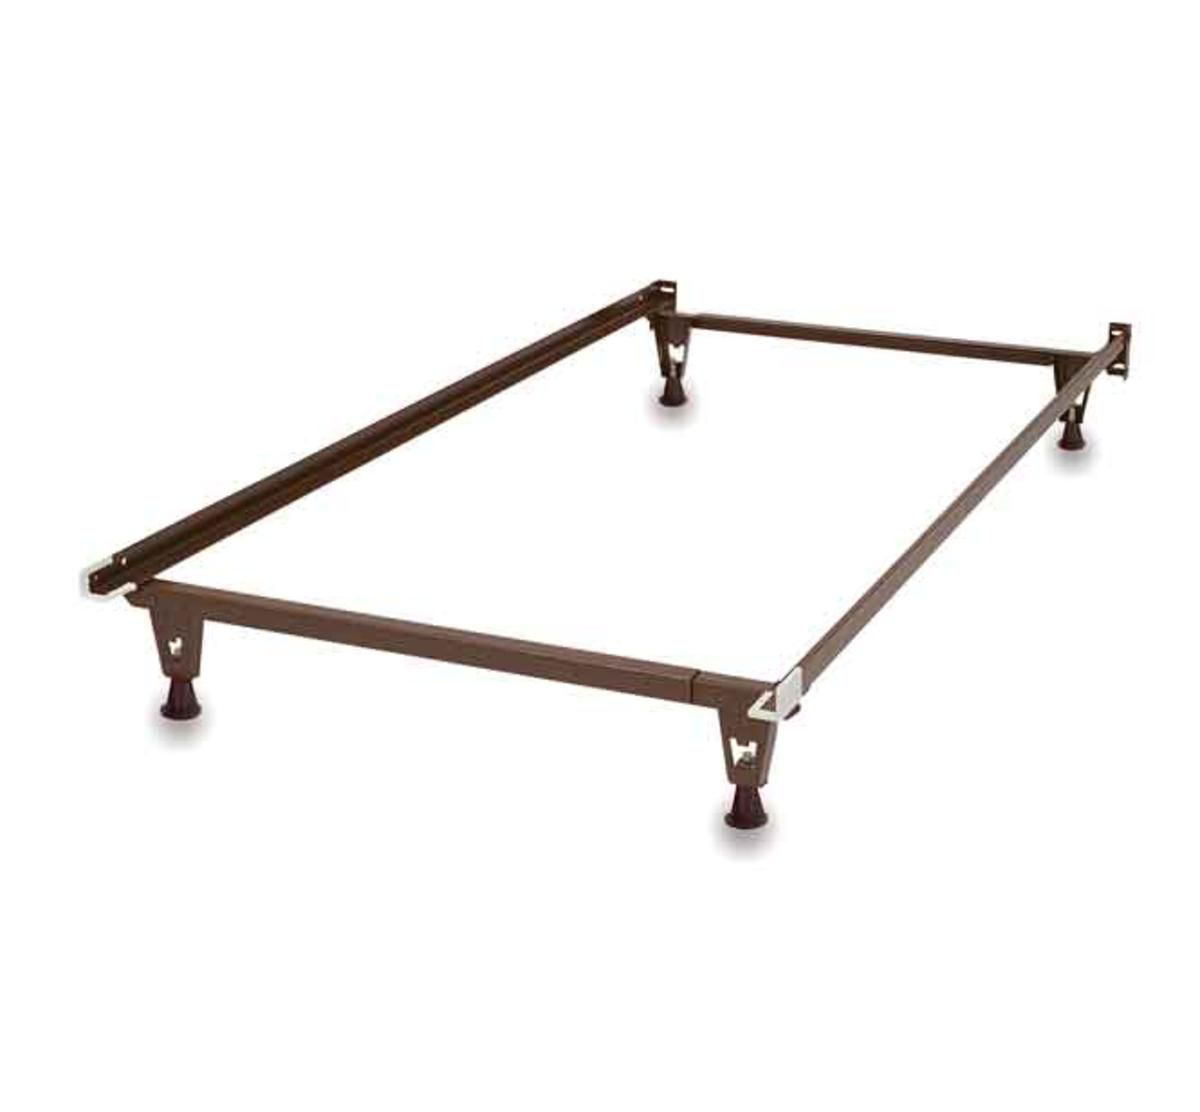 Value Twin Full Bed Frame Bad, How Long Is A Full Bed Frame